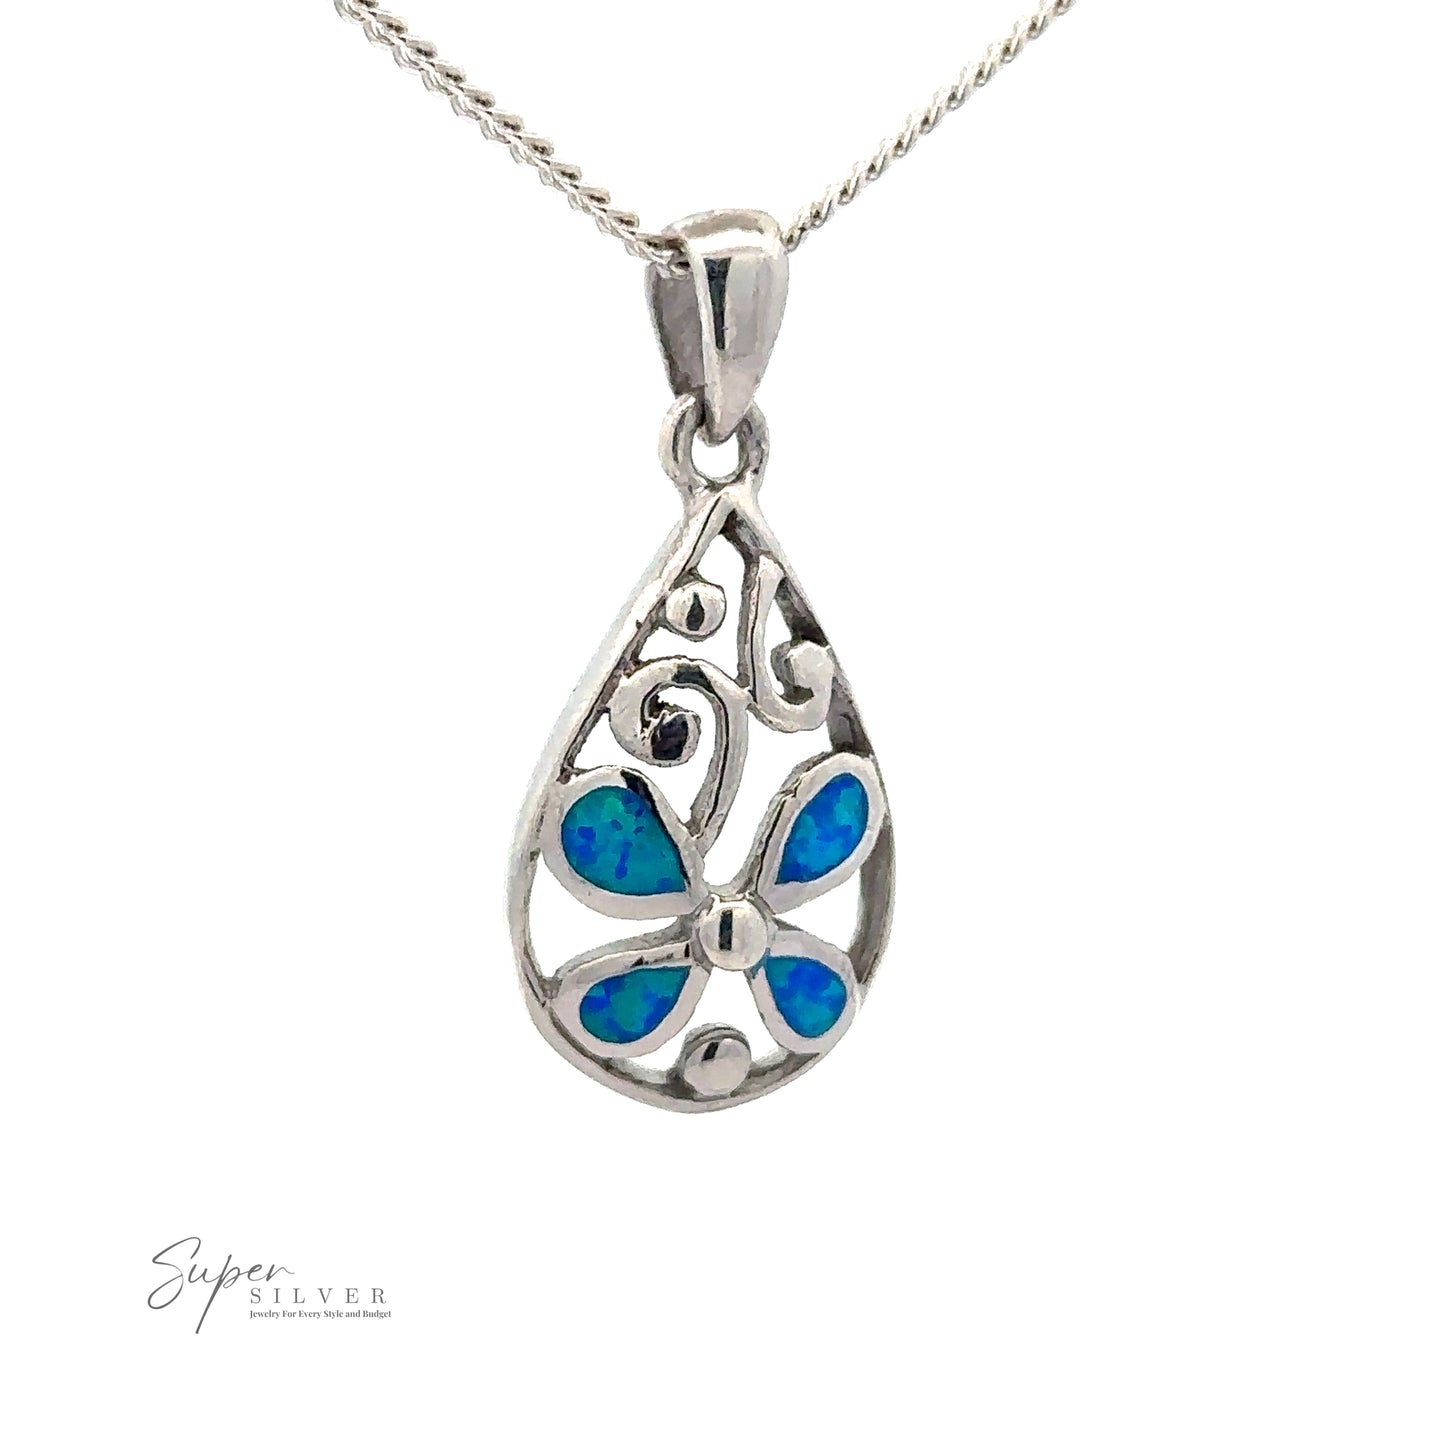 
                  
                    A Teardrop Blue Opal Pendant With Flower Design featuring an intricate design and a blue butterfly motif, suspended on a rhodium-finished silver chain with a lab-created opal. The text "Super Silver" is visible in the bottom left corner.
                  
                